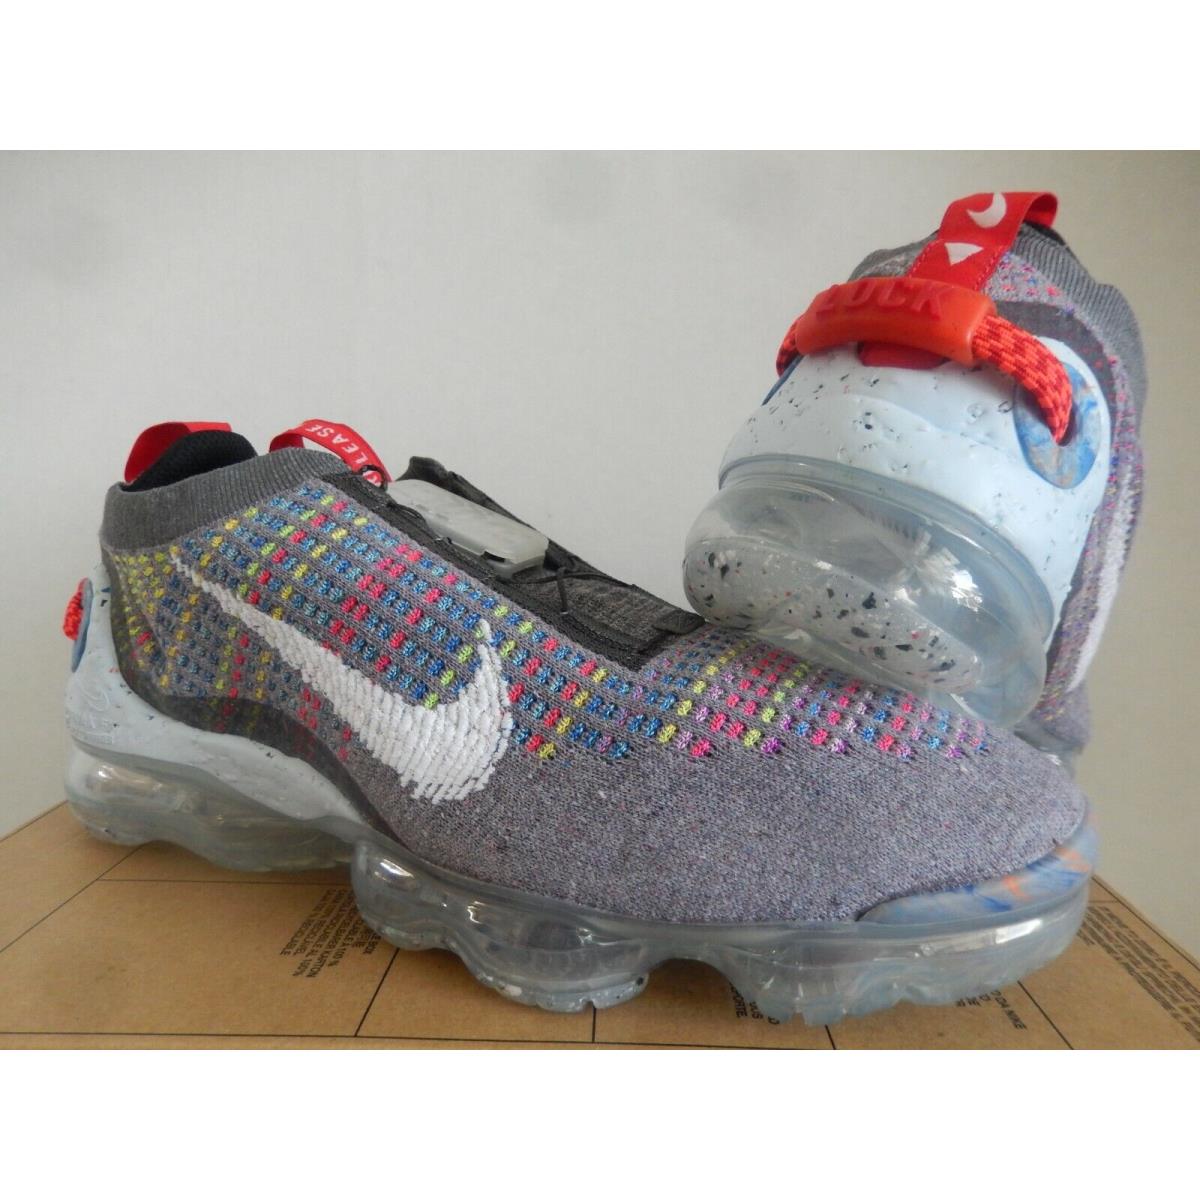 Nike shoes Air Vapormax Flyknit - Multicolor 1